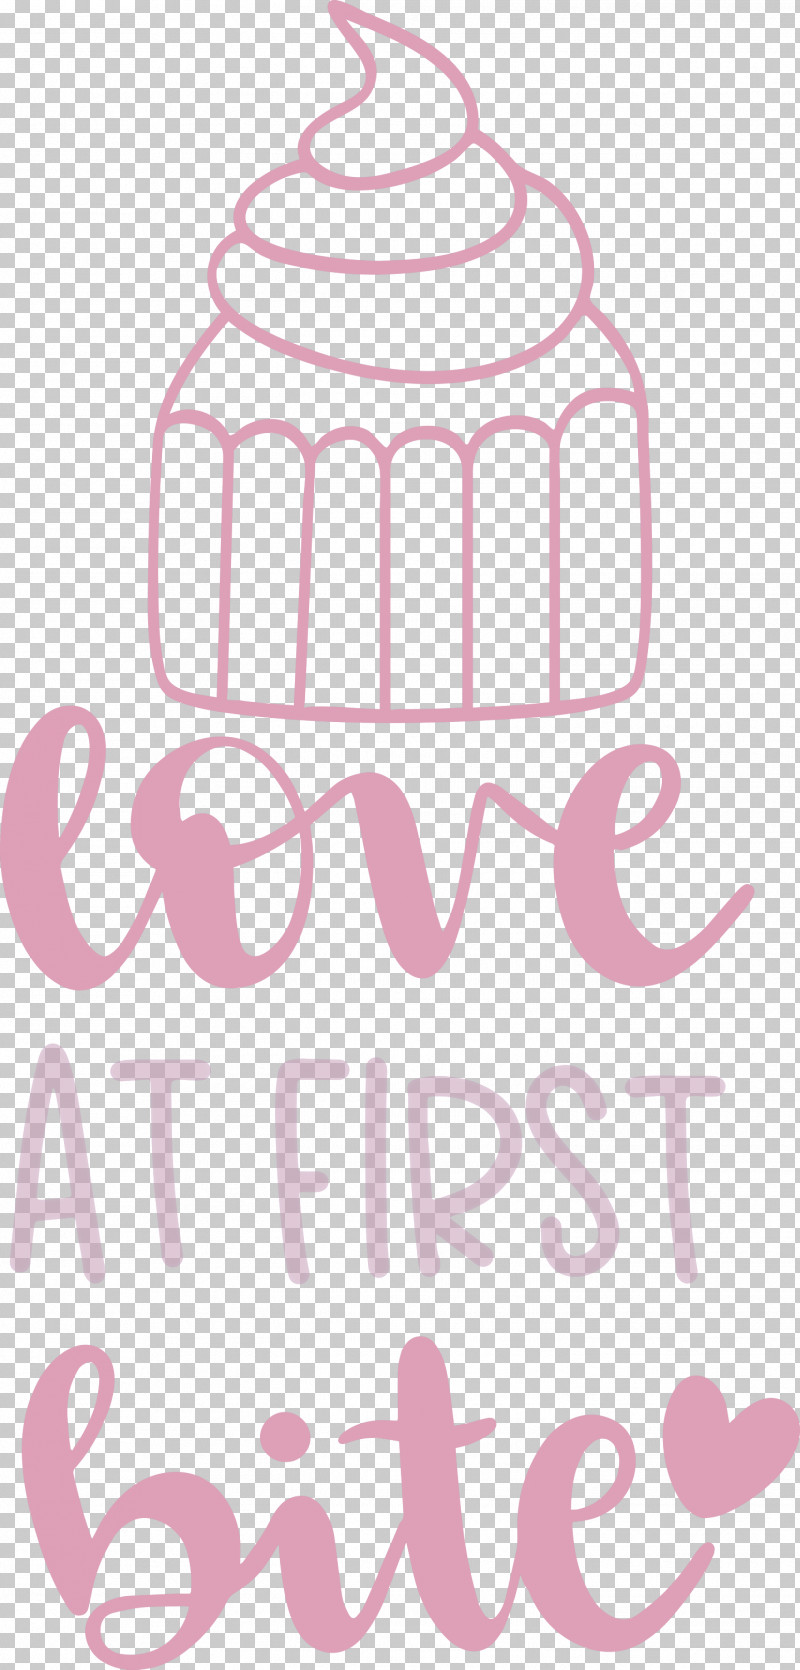 Love At First Bite Cooking Kitchen PNG, Clipart, Cooking, Cupcake, Drinkware, Food, Geometry Free PNG Download